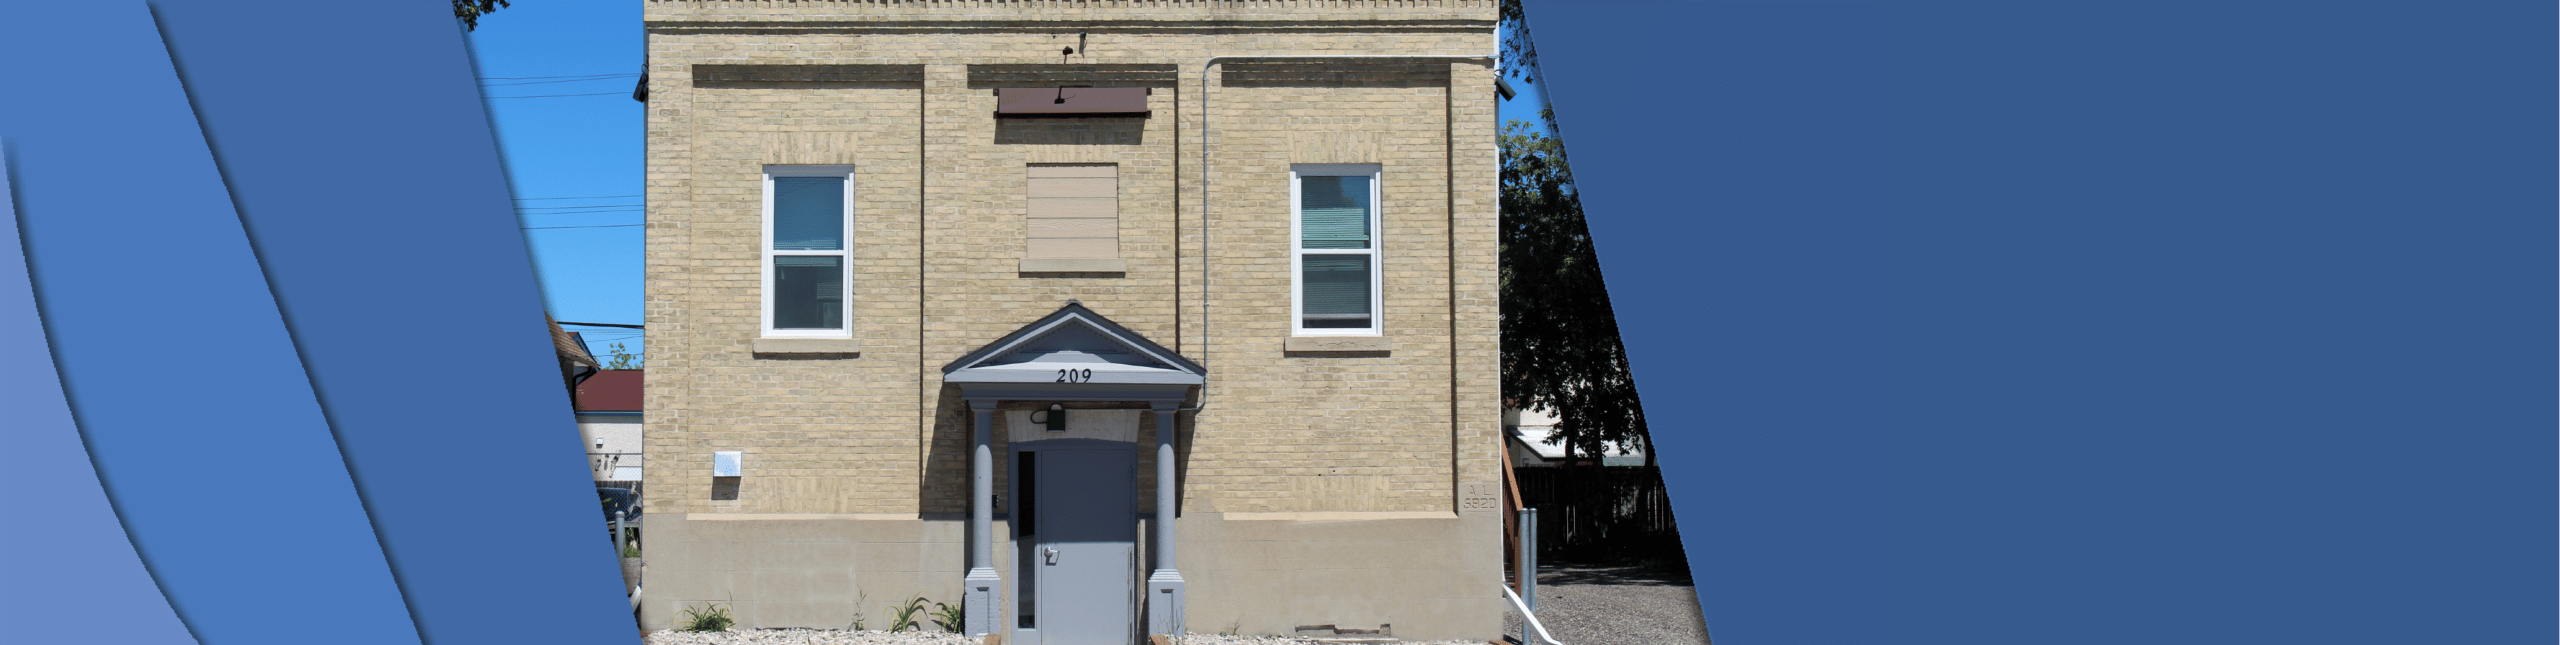 Photo shows the front of the Eaton Masonic Hall. The front door overhang supported by two pillars. Two windows on either side of the building